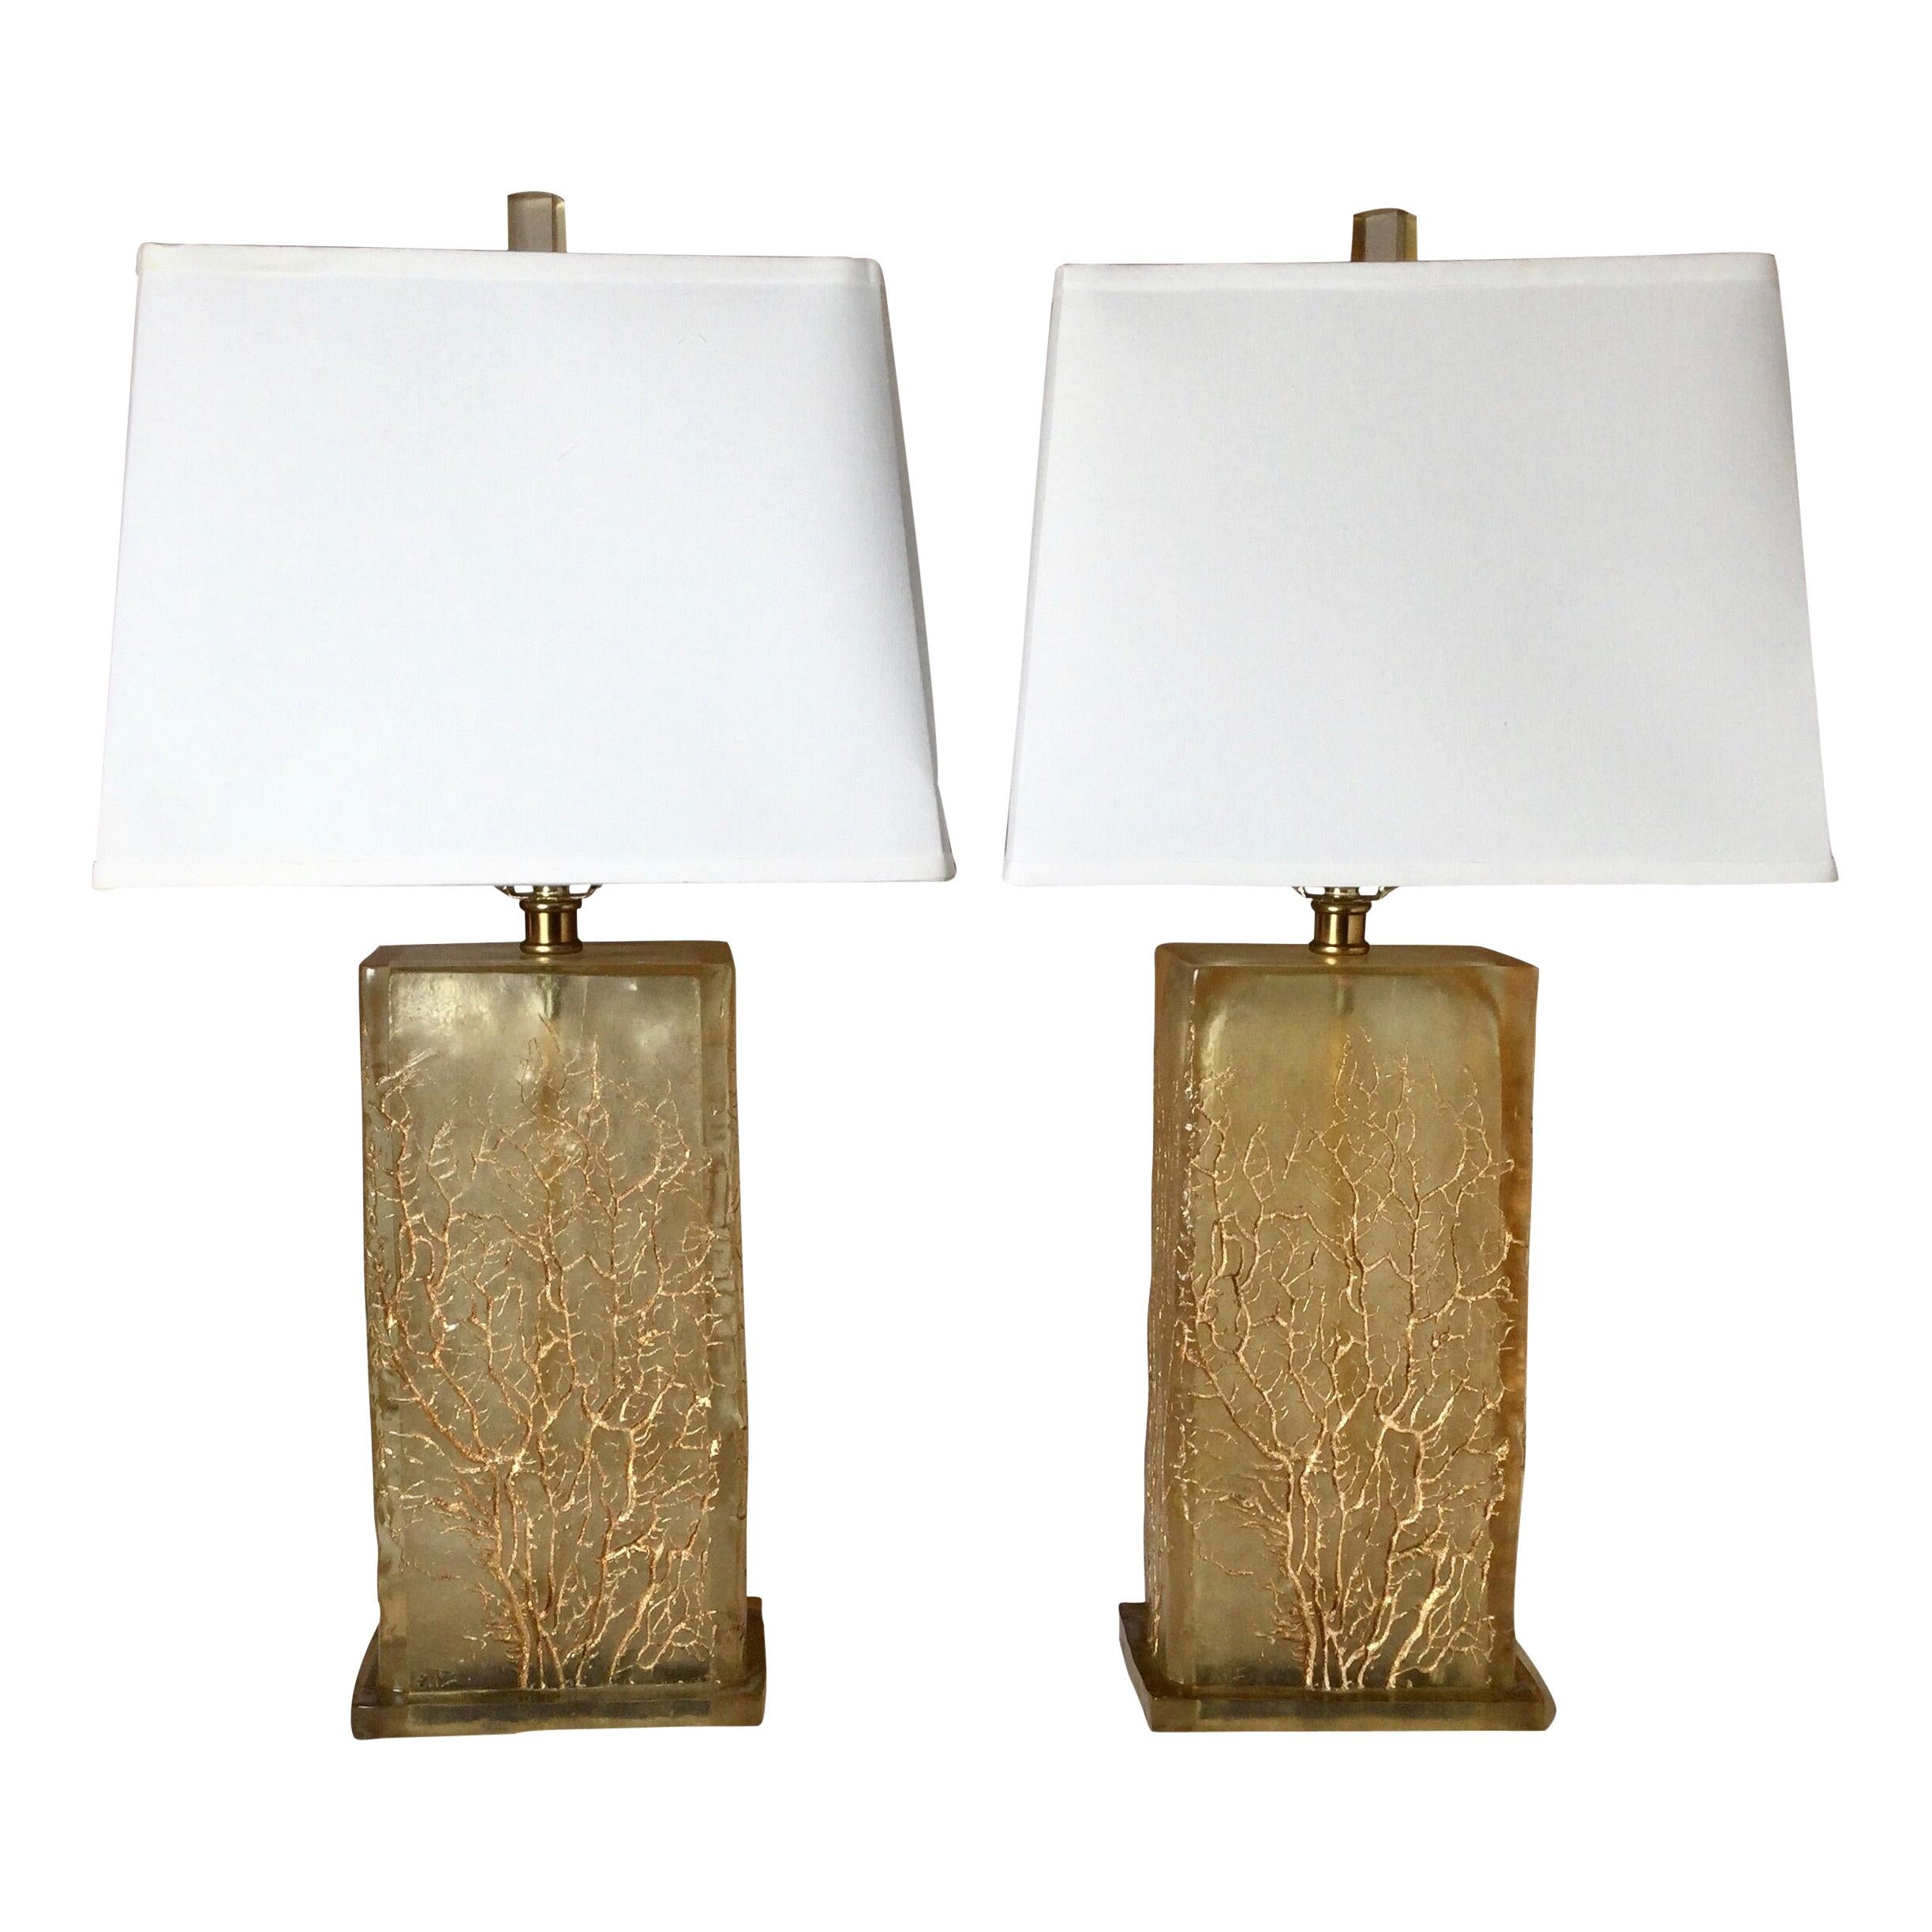 Pair of Chic Amber Lucite Lamps